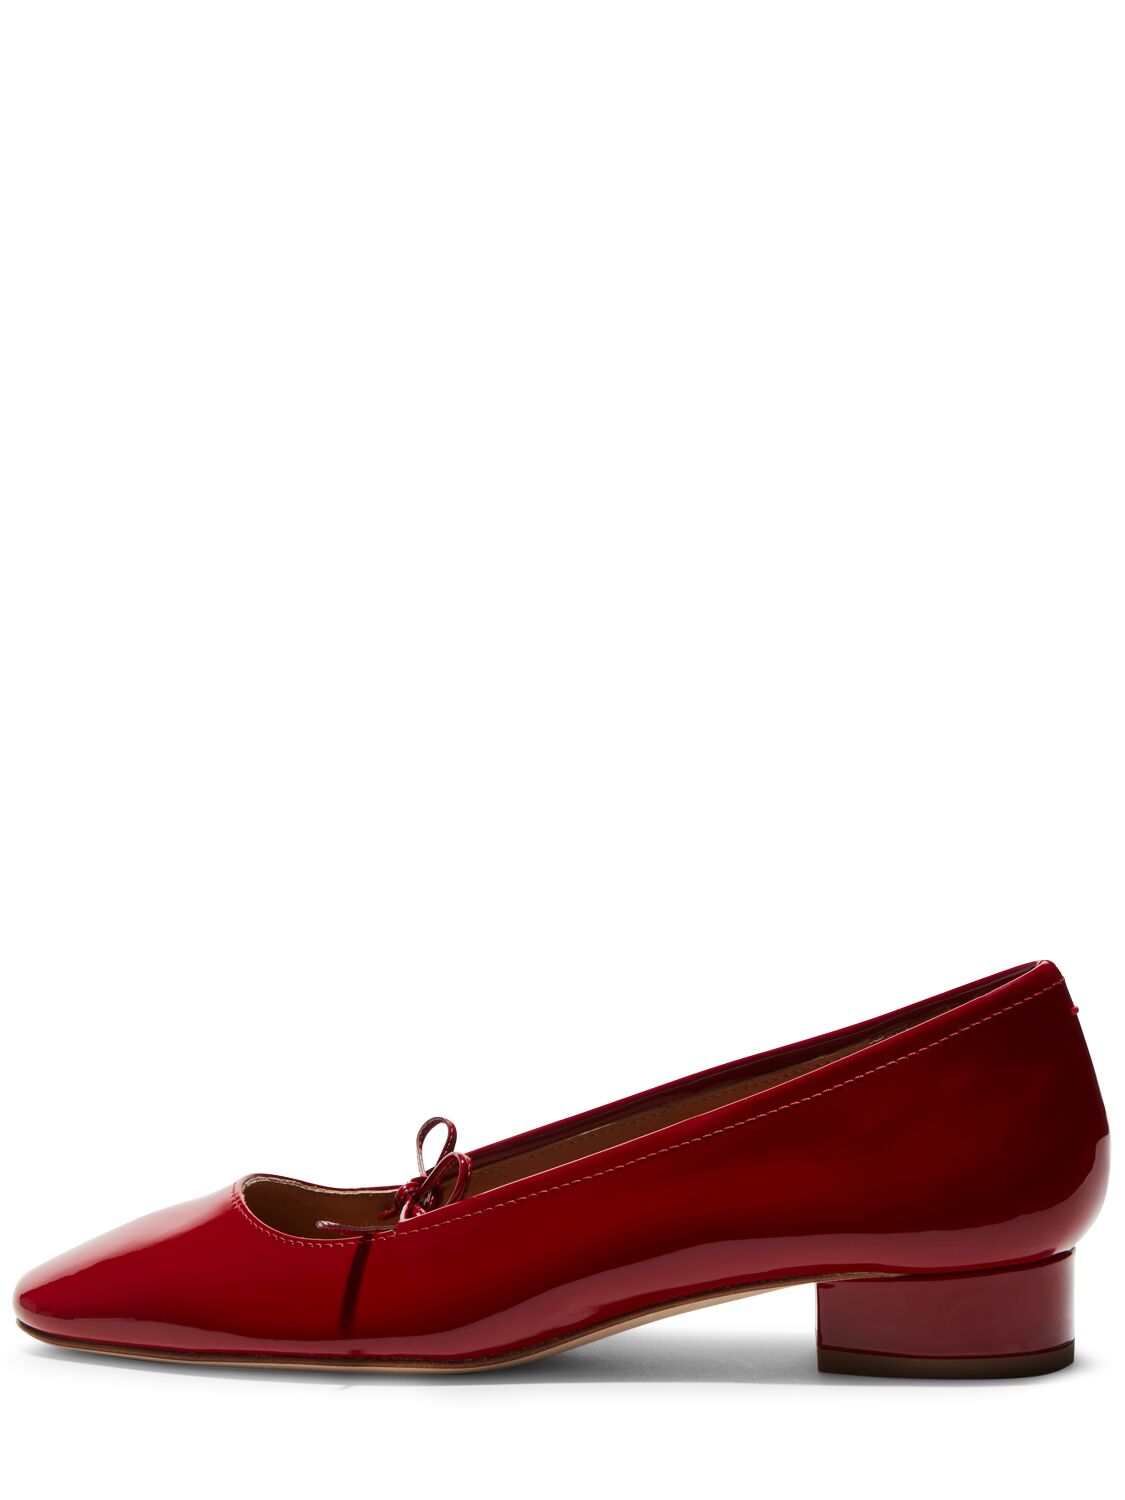 Aeyde 25mm Darya Leather Pumps In Cranberry